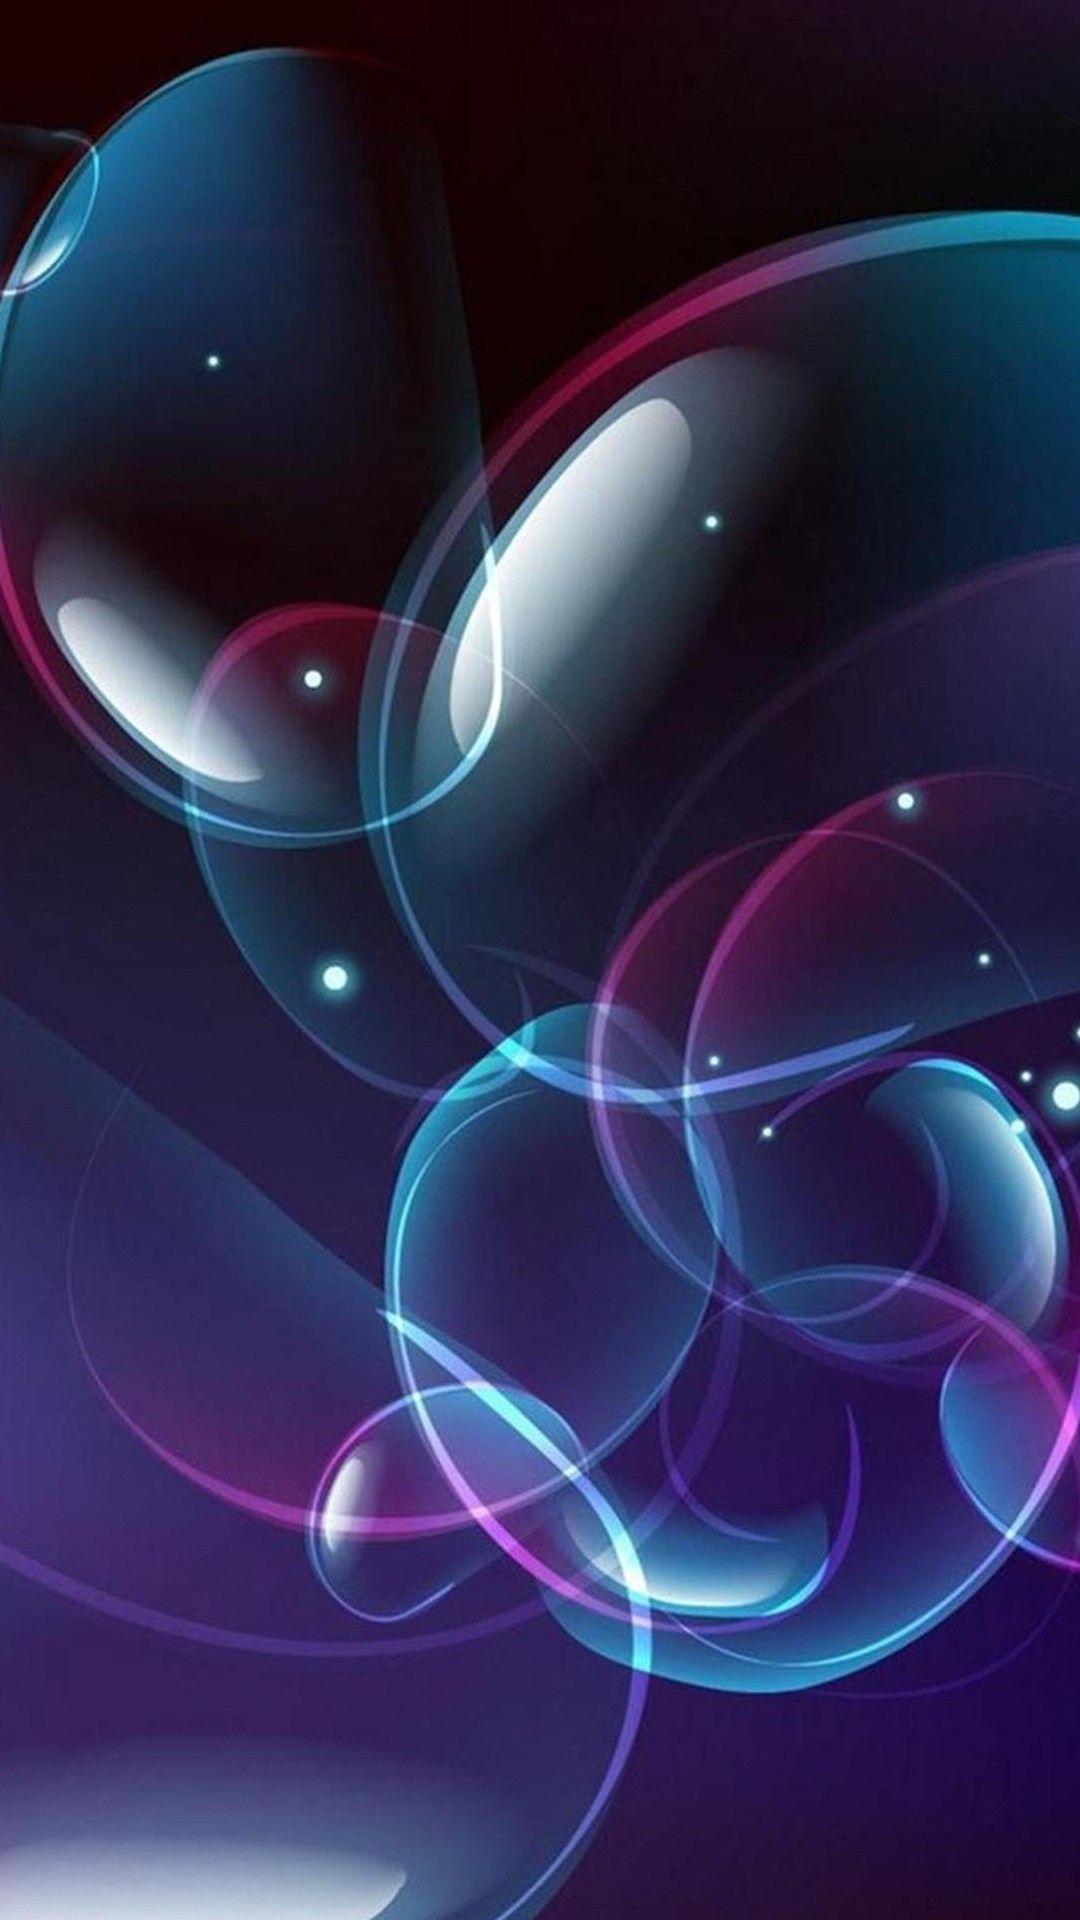 Sony Xperia Z Wallpapers Wallpaper Cave